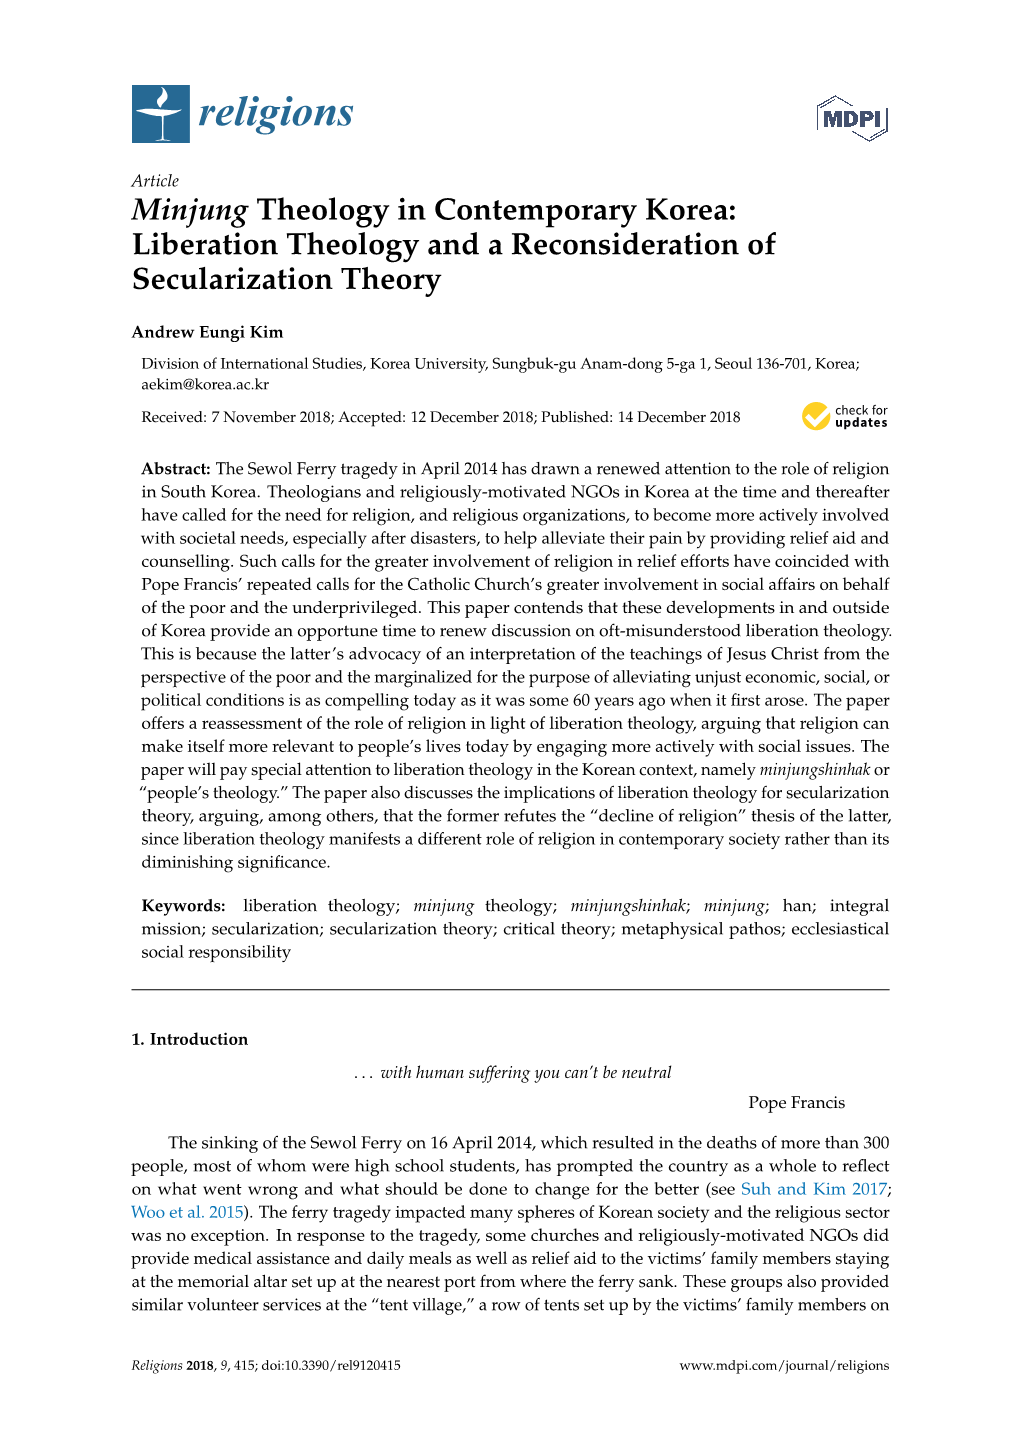 Minjung Theology in Contemporary Korea: Liberation Theology and a Reconsideration of Secularization Theory